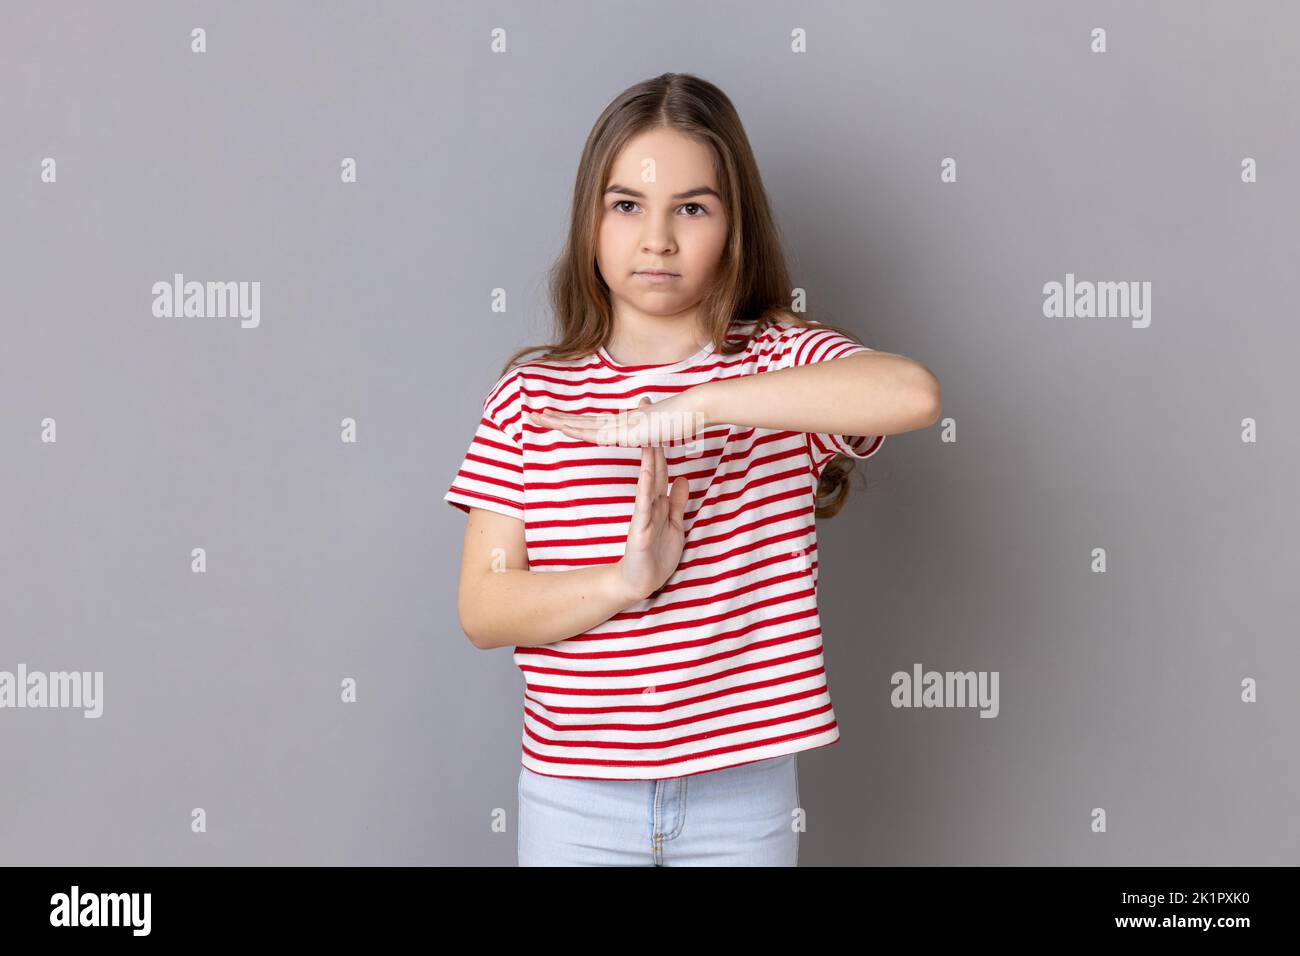 Portrait of frustrated little girl wearing striped T-shirt showing time out gesture, looking at camera, deadline with test in school. Indoor studio shot isolated on gray background. Stock Photo